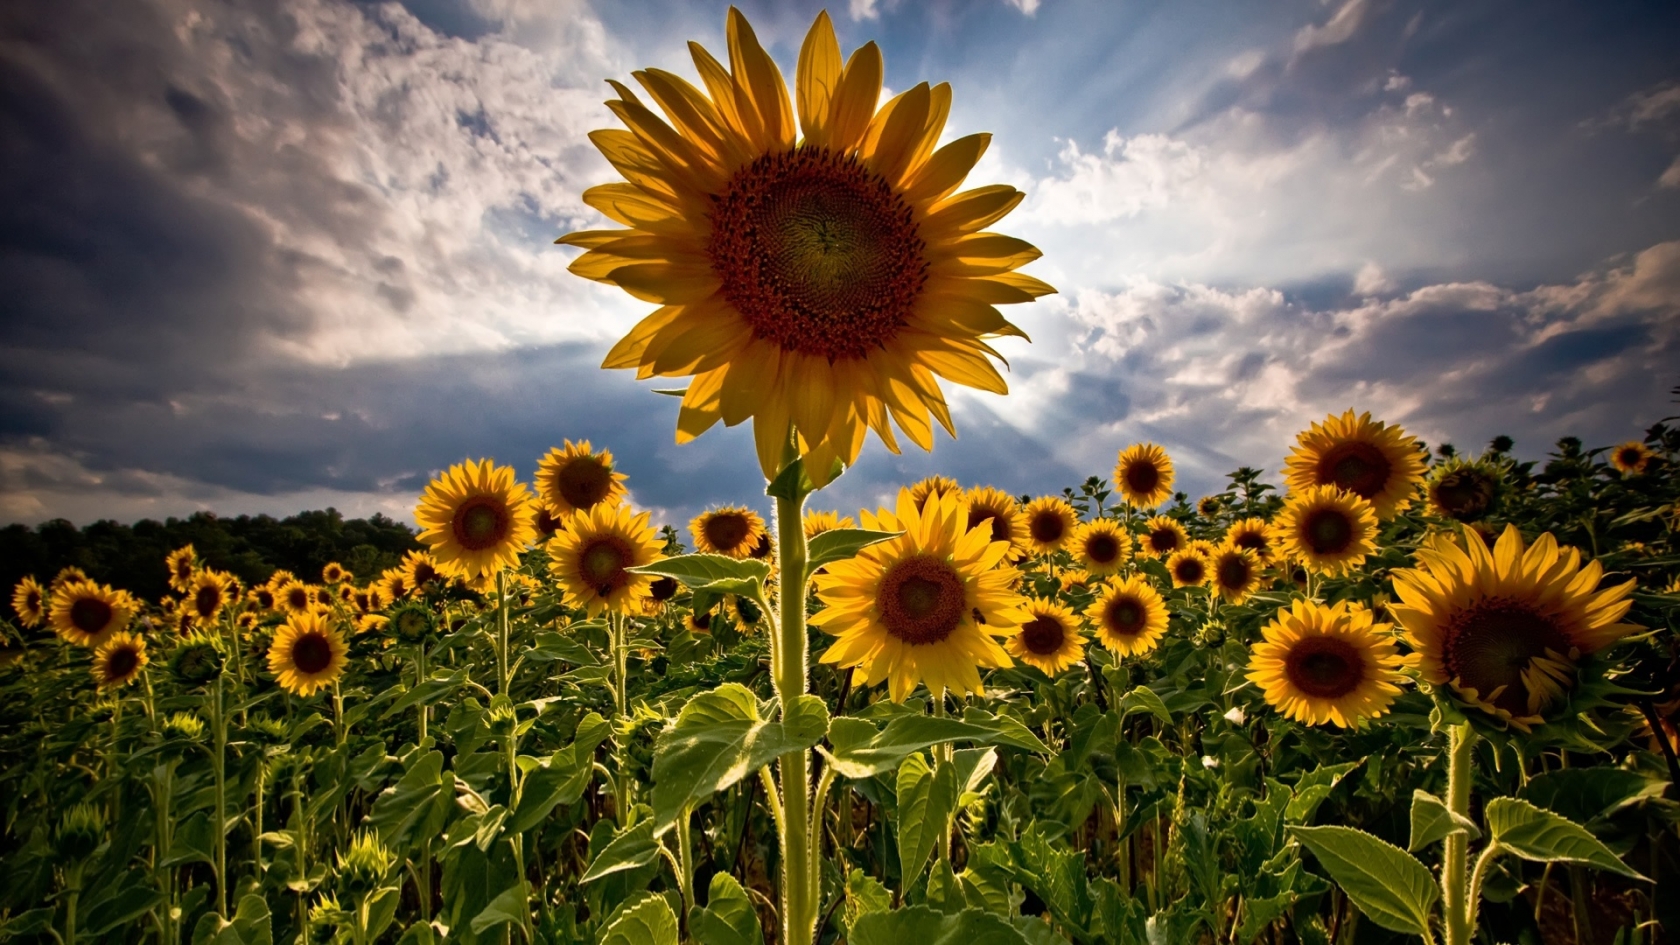 Amazing Sunflowers for 1680 x 945 HDTV resolution